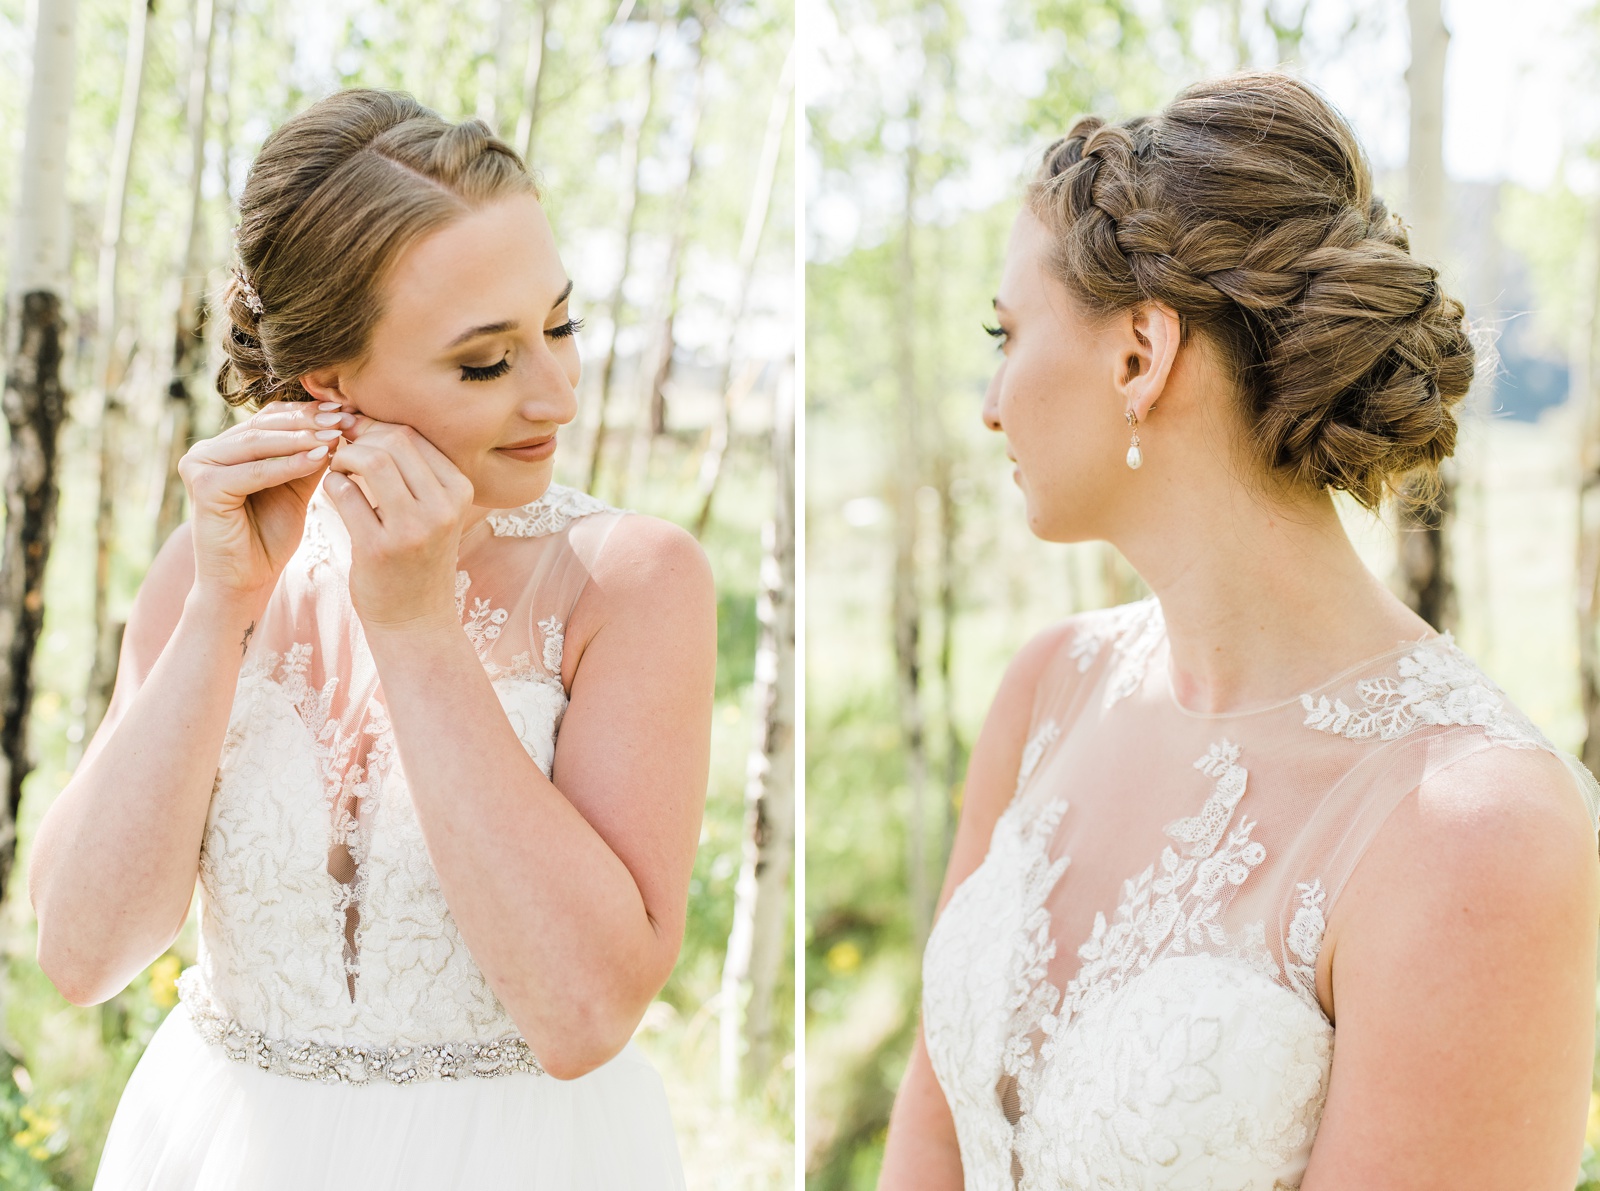 Bride putting on earrings and back of bride's hairstyle